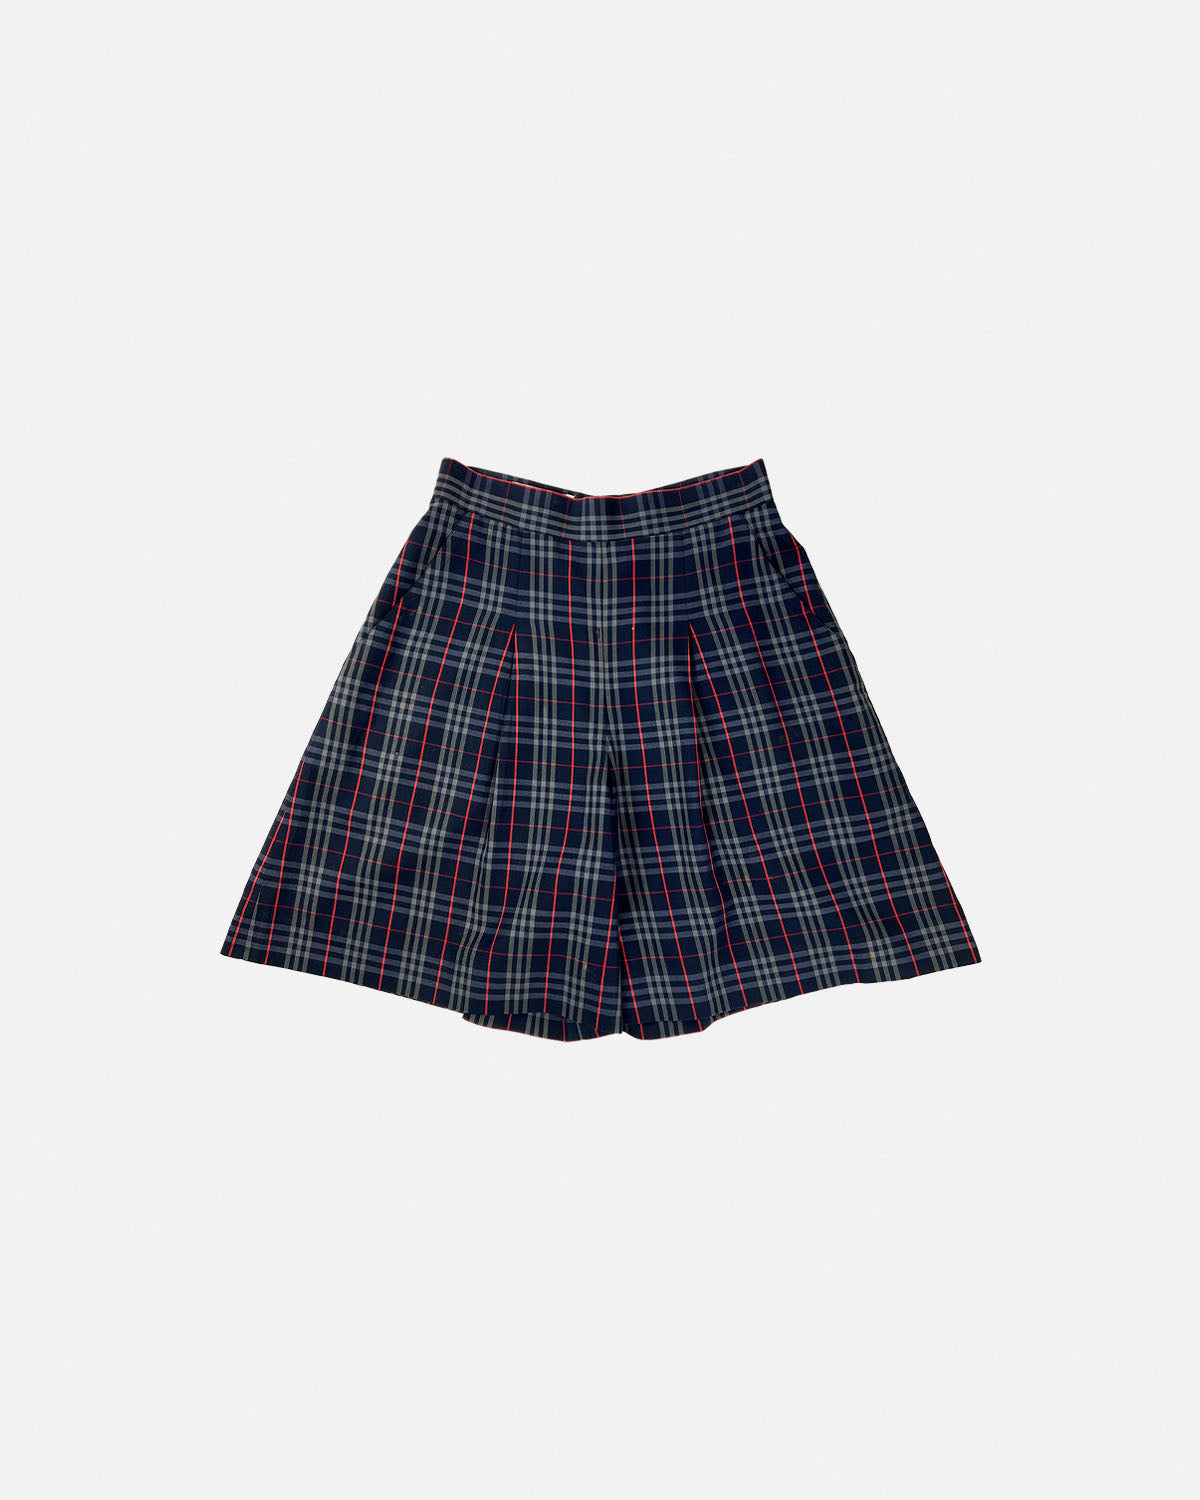 Burberry Navy/Red Check Shorts